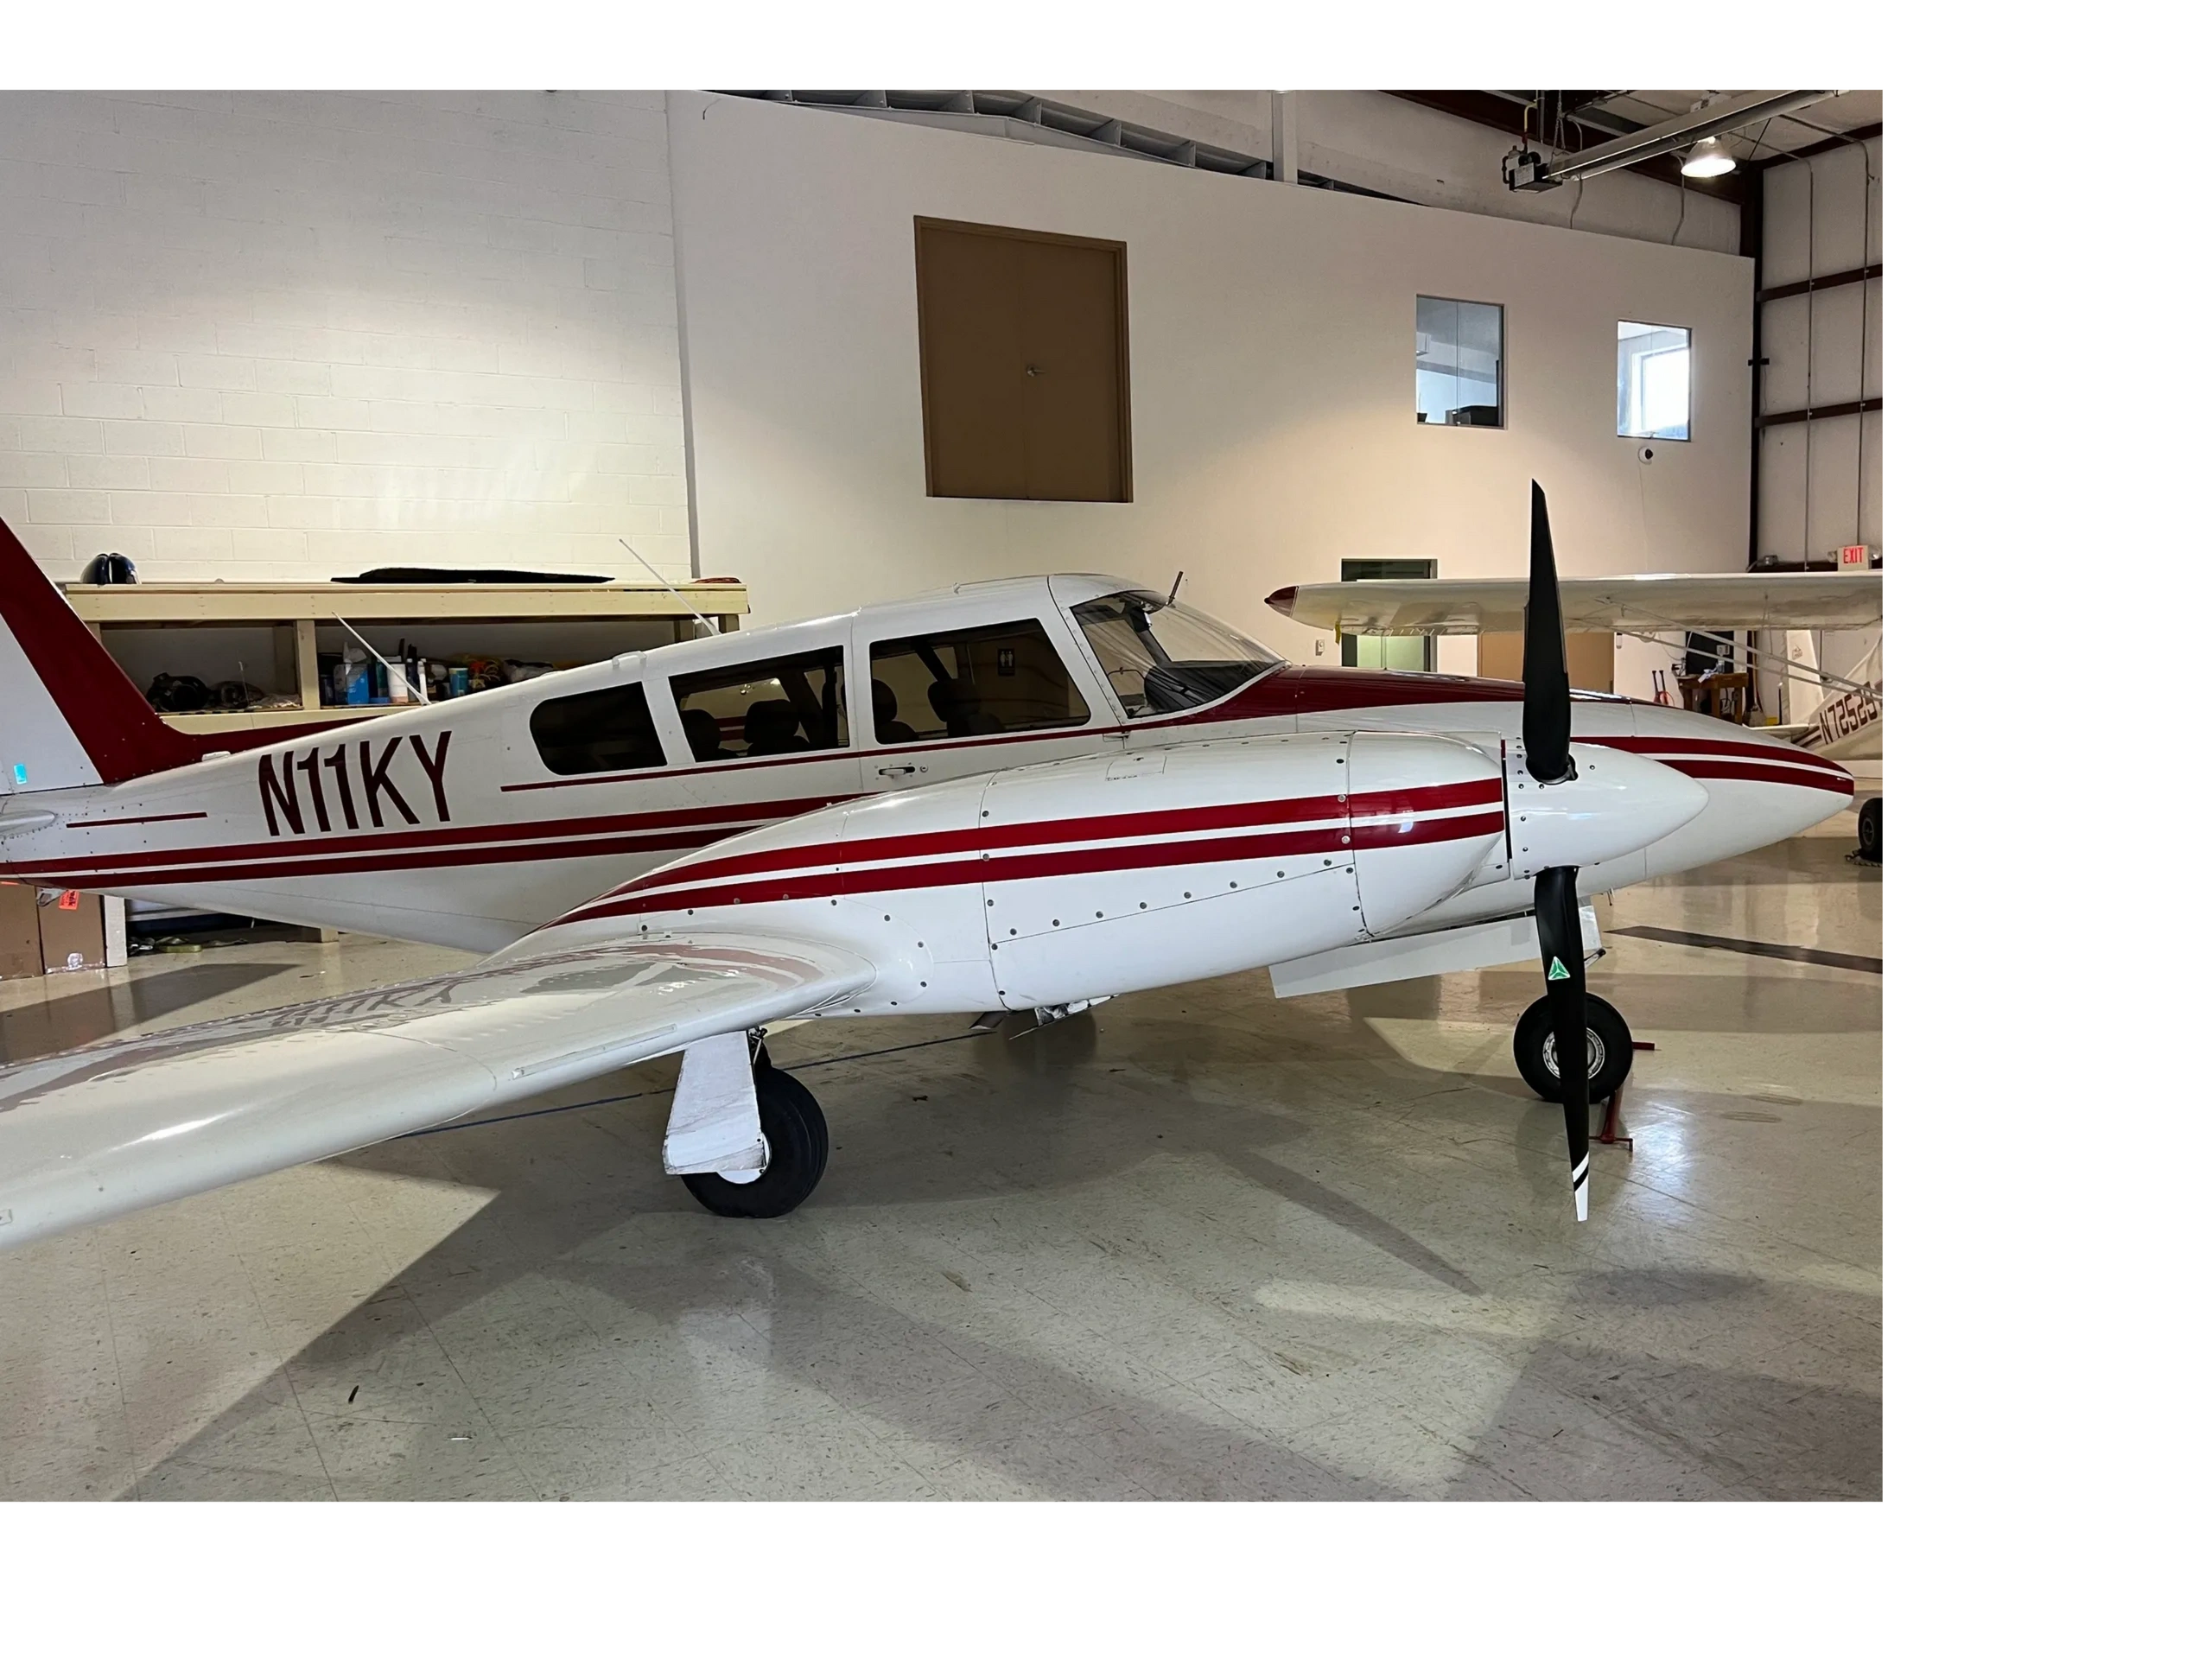 N11KY - Twin Comanche 
Available for Multi-Engine Instruction.